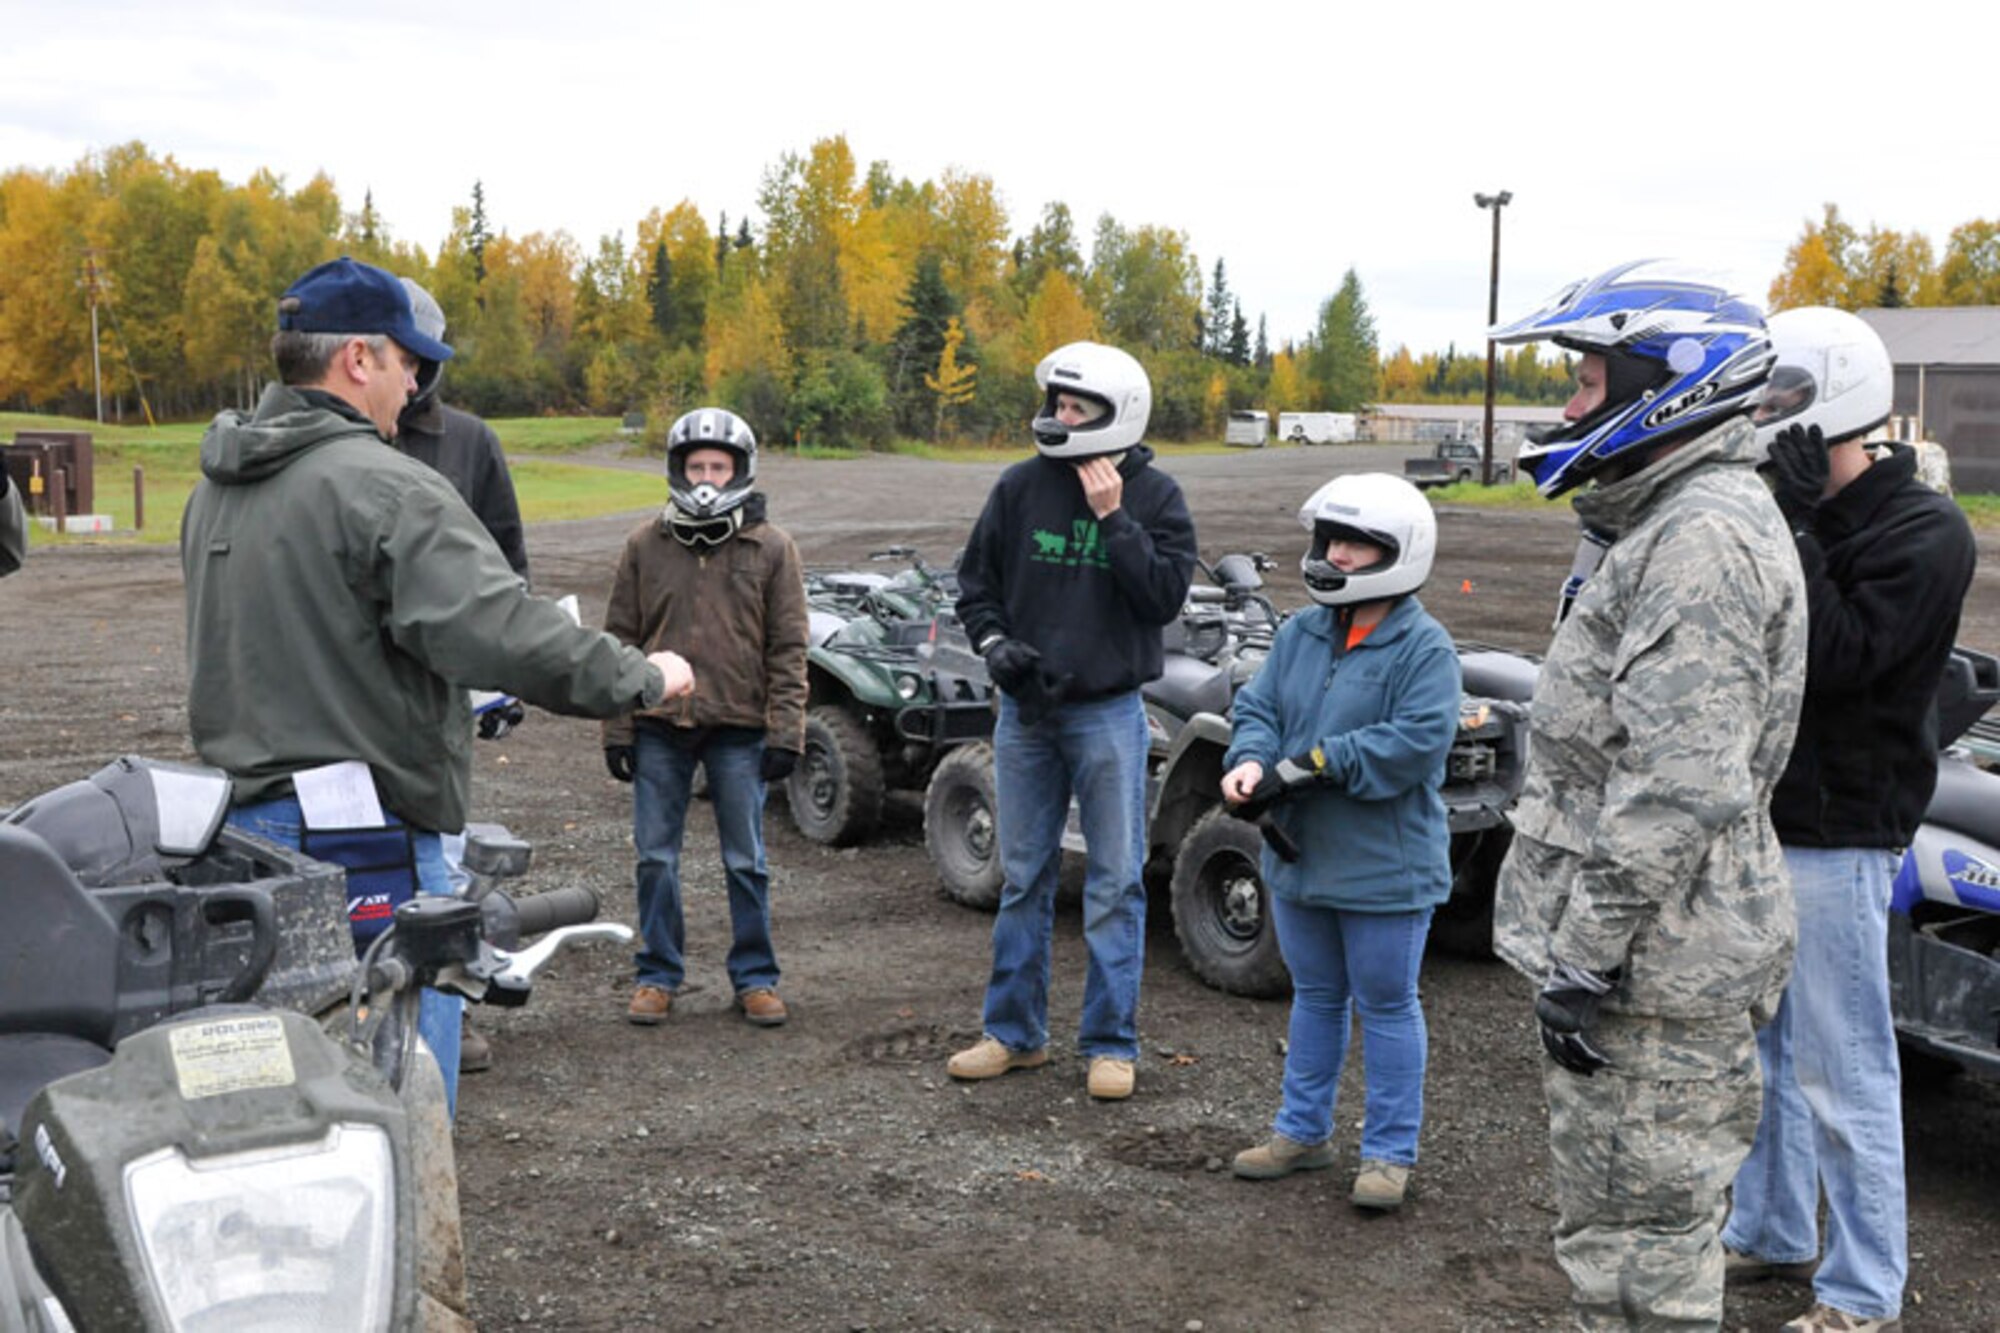 Riders practice ATV safety, prepare for missions > Joint Elmendorf-Richardson >